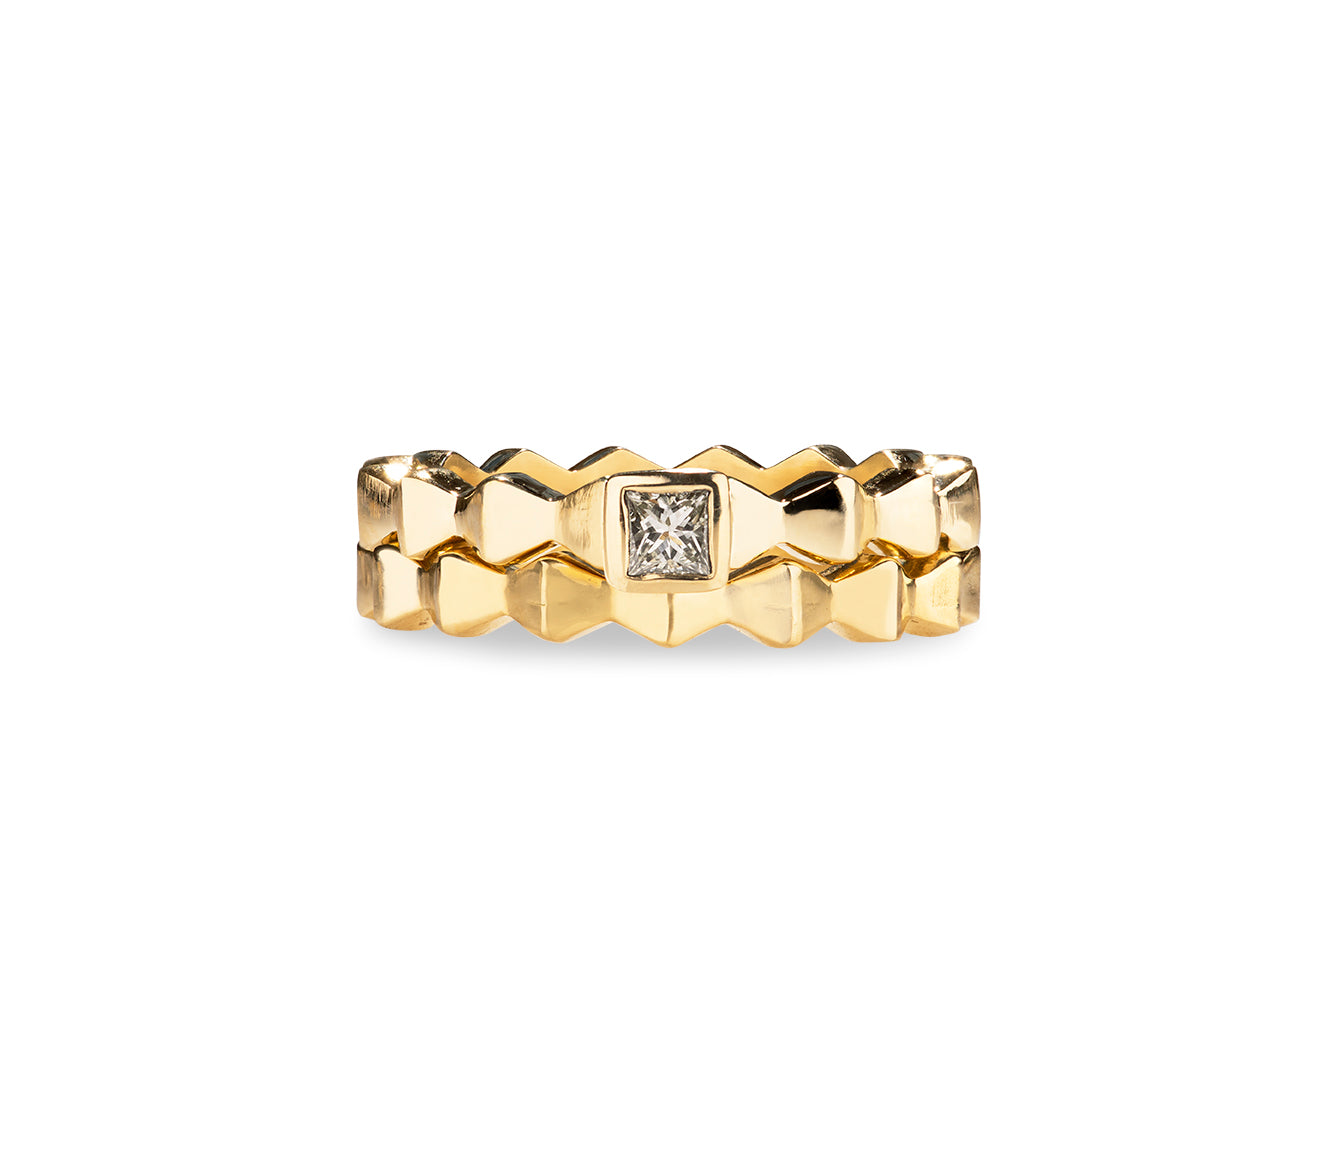 Diamond Pyra Stacking ring in 18ct yellow gold from Romany Starrs